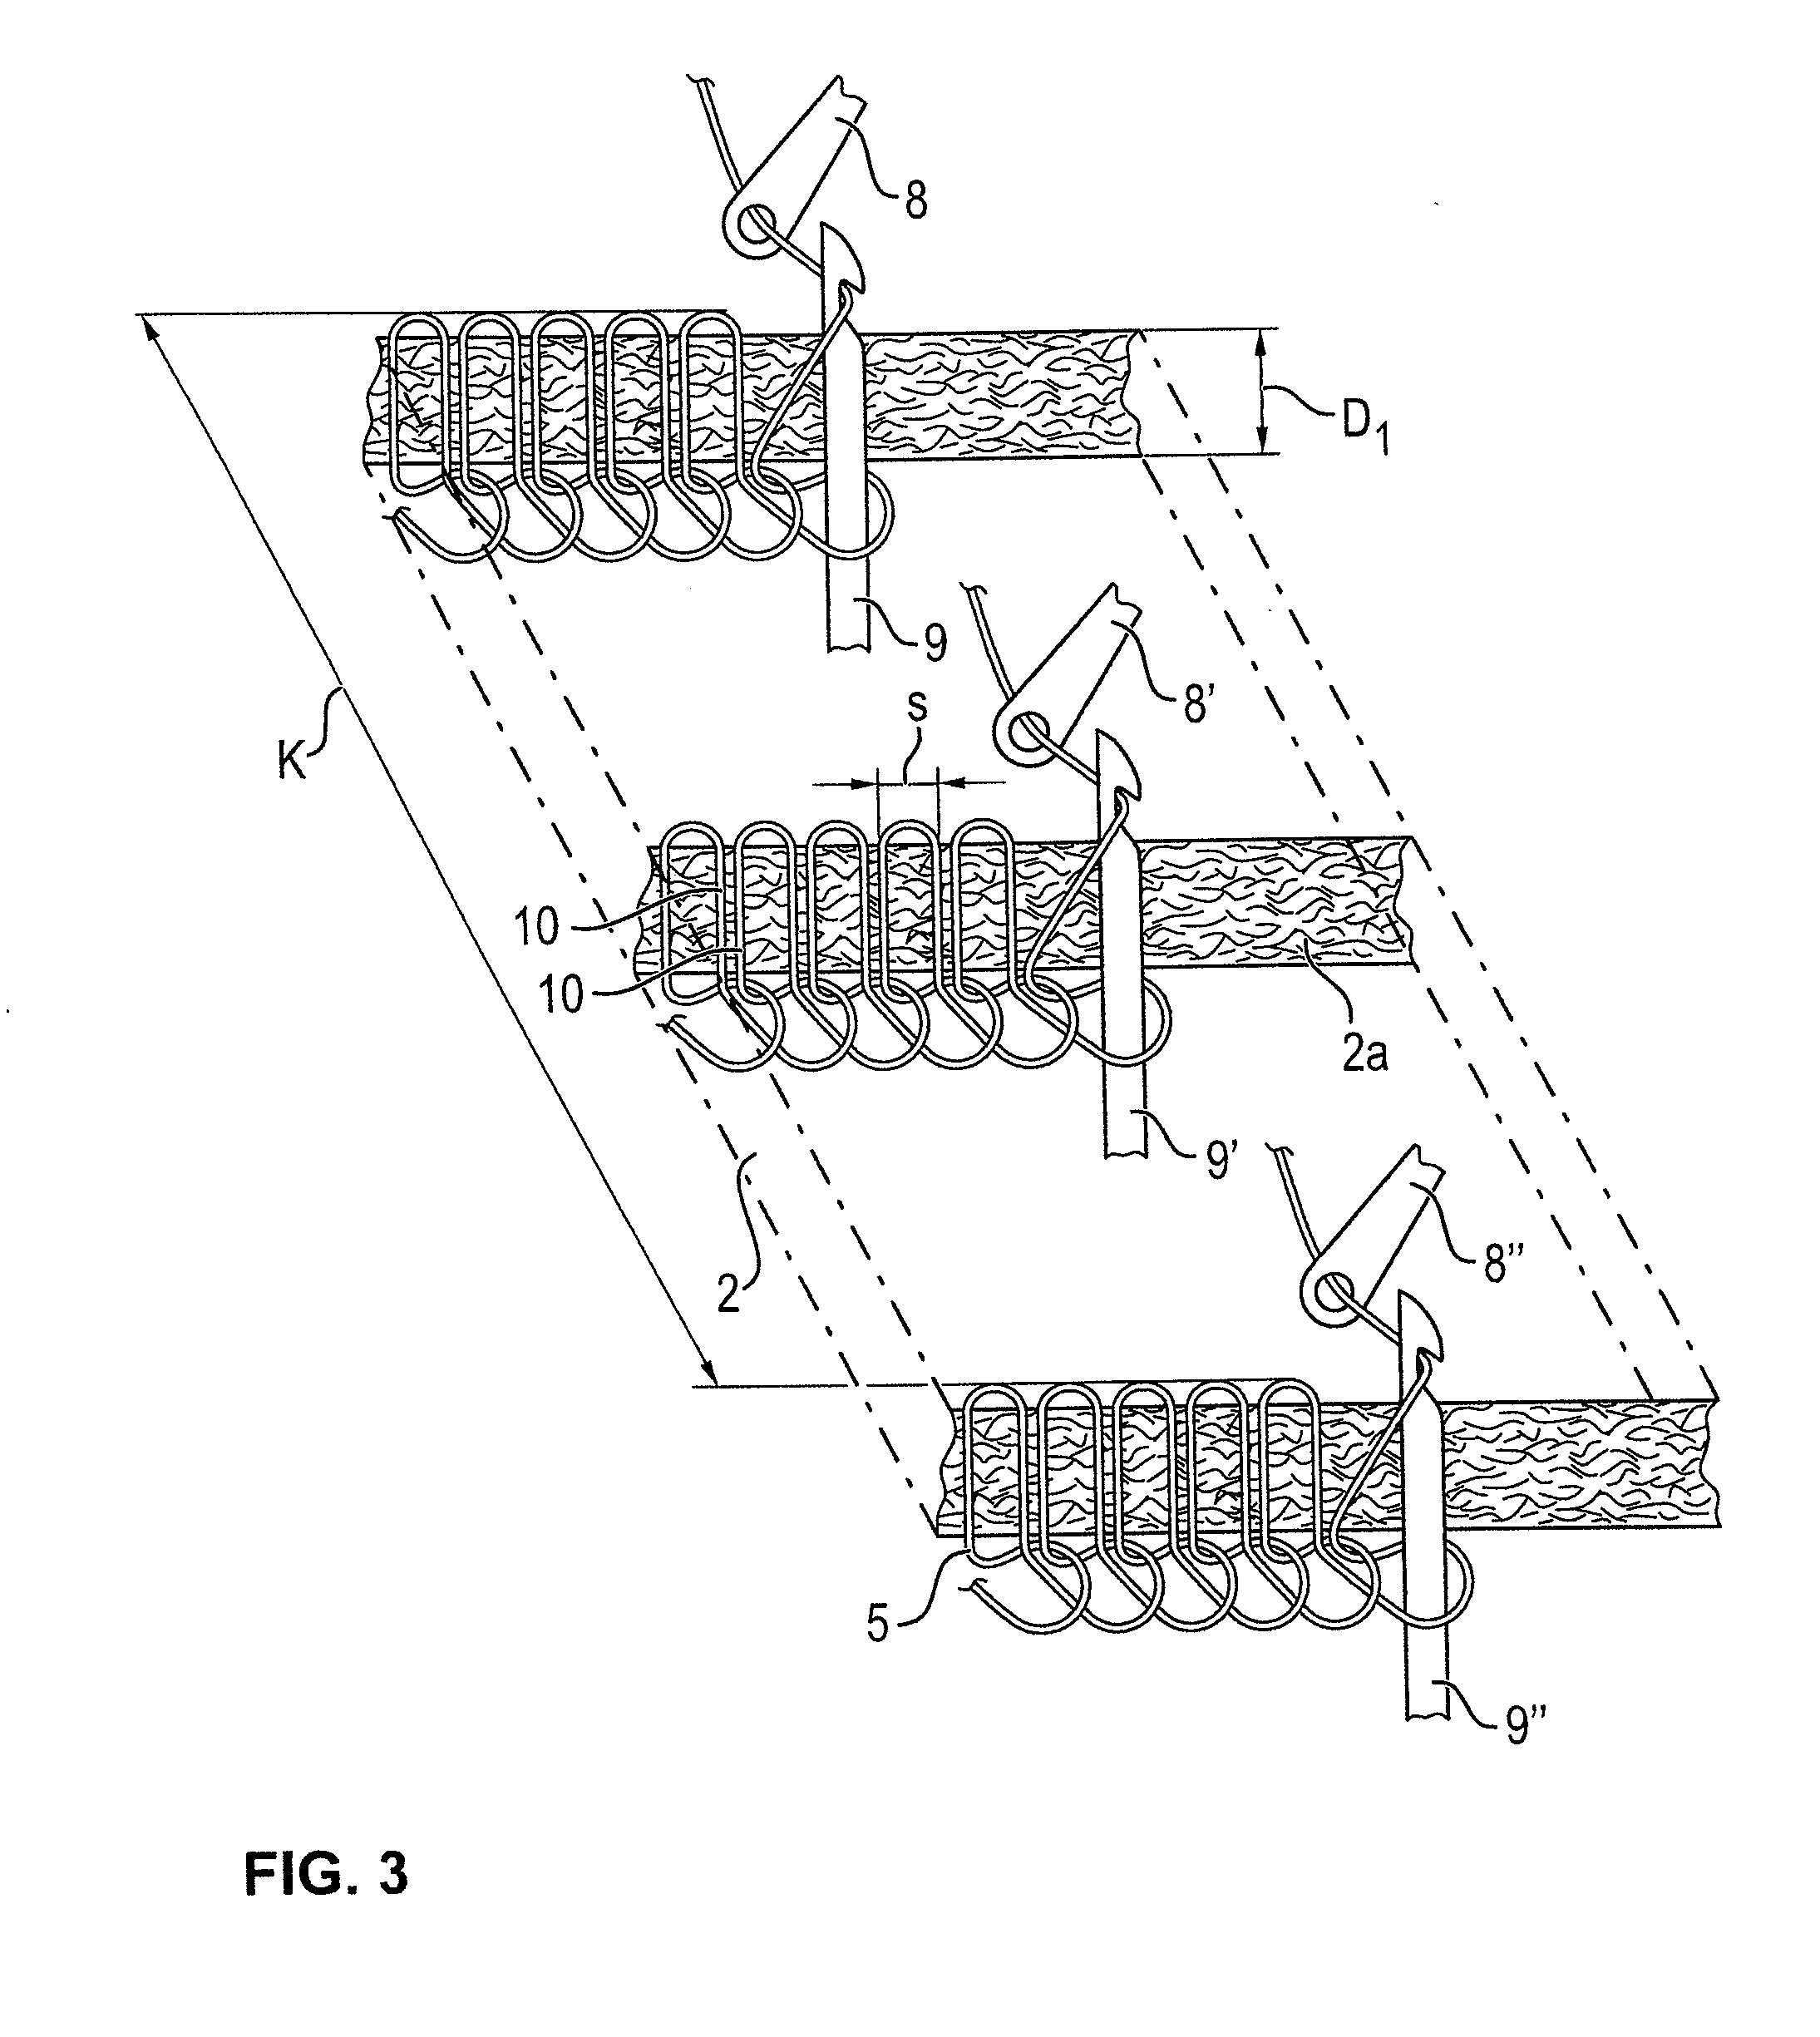 Adhesive tape having a stitch-bonded nonwoven carrier